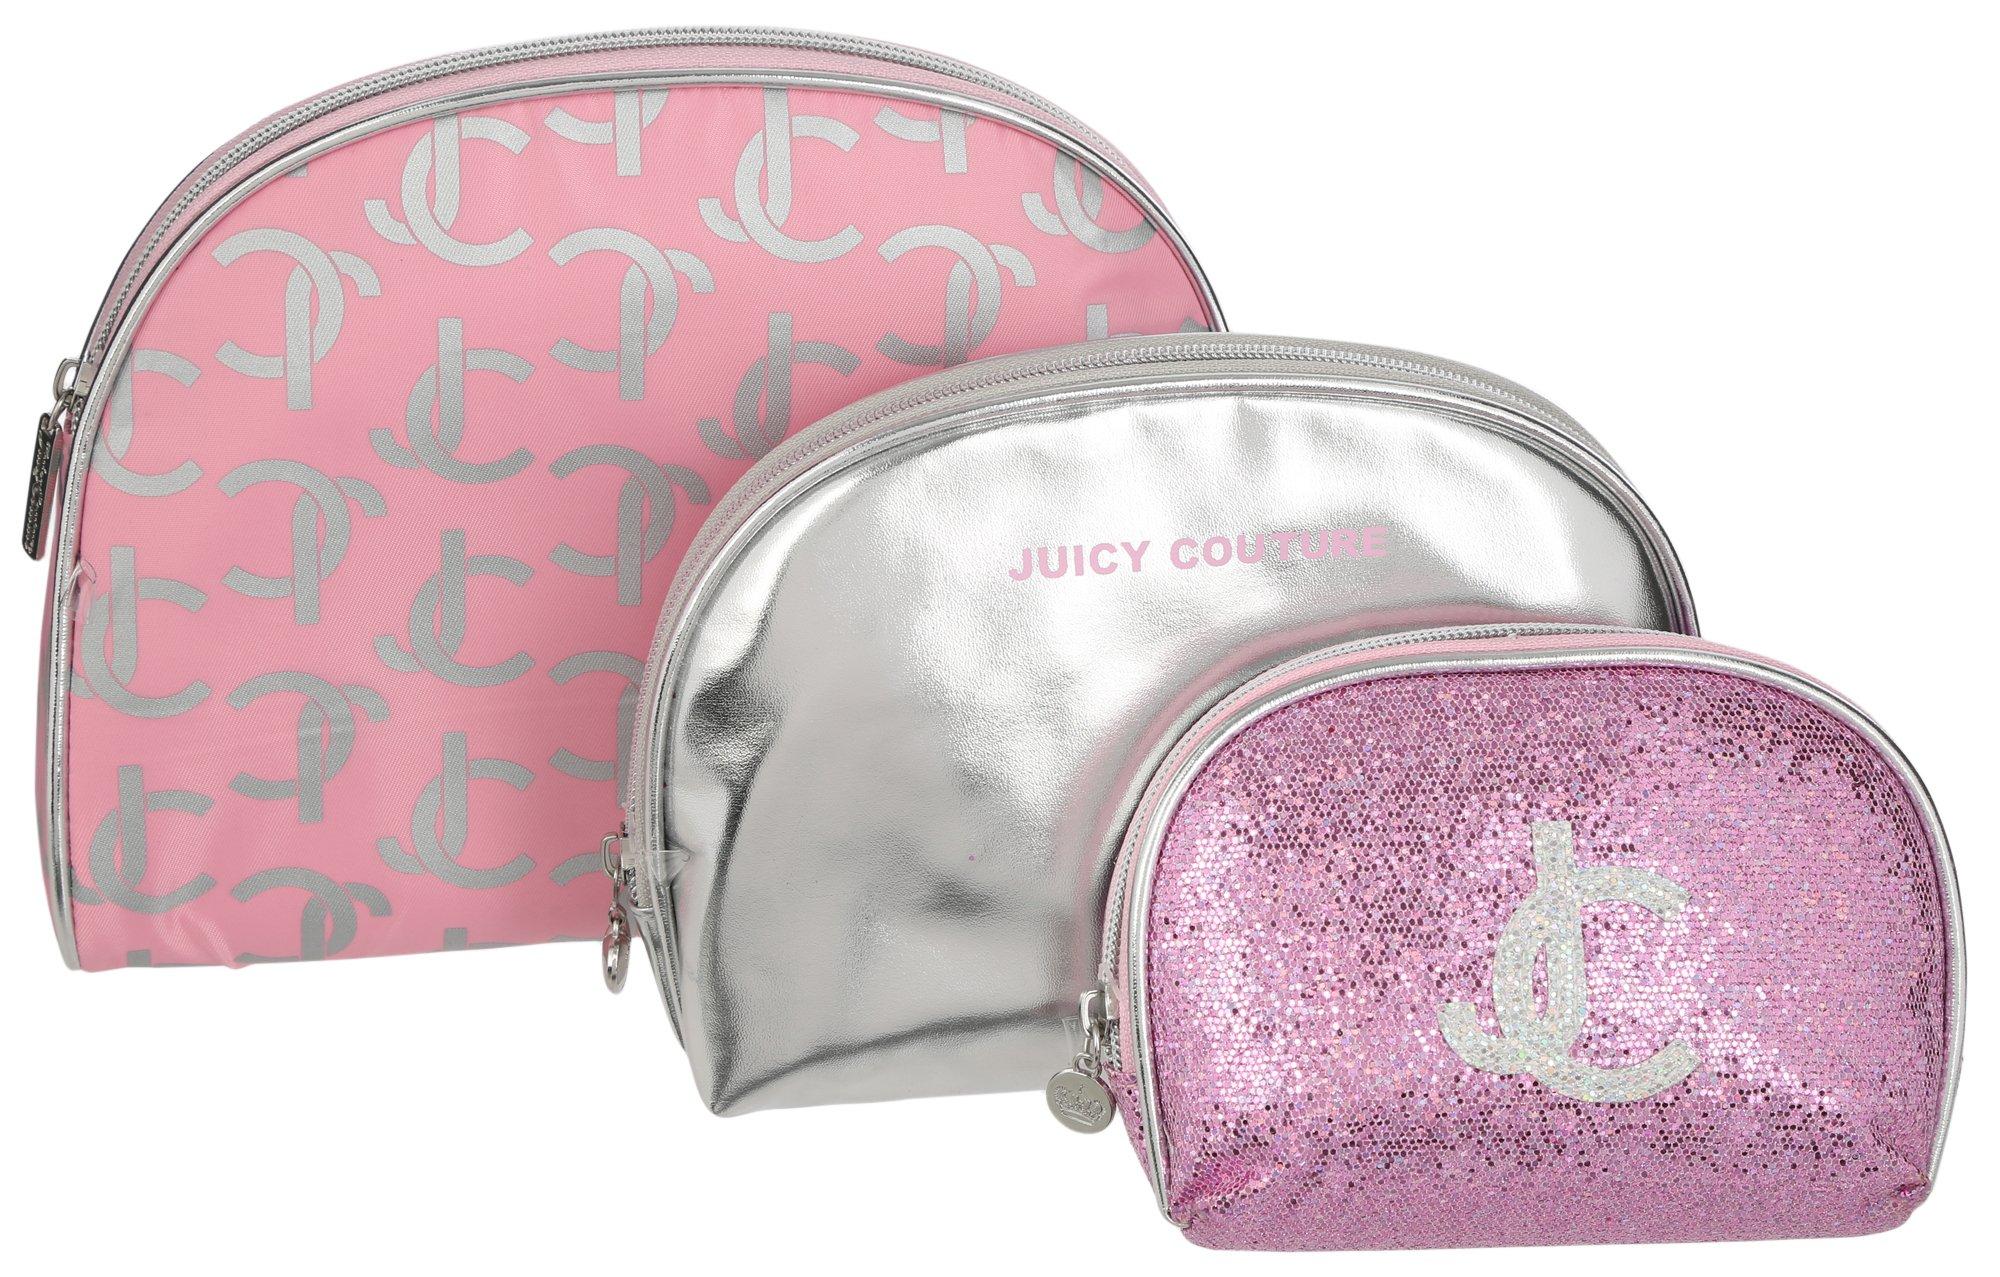 Juicy Couture 4-Pc. Cosmetic Cases & Travel Bottle Set